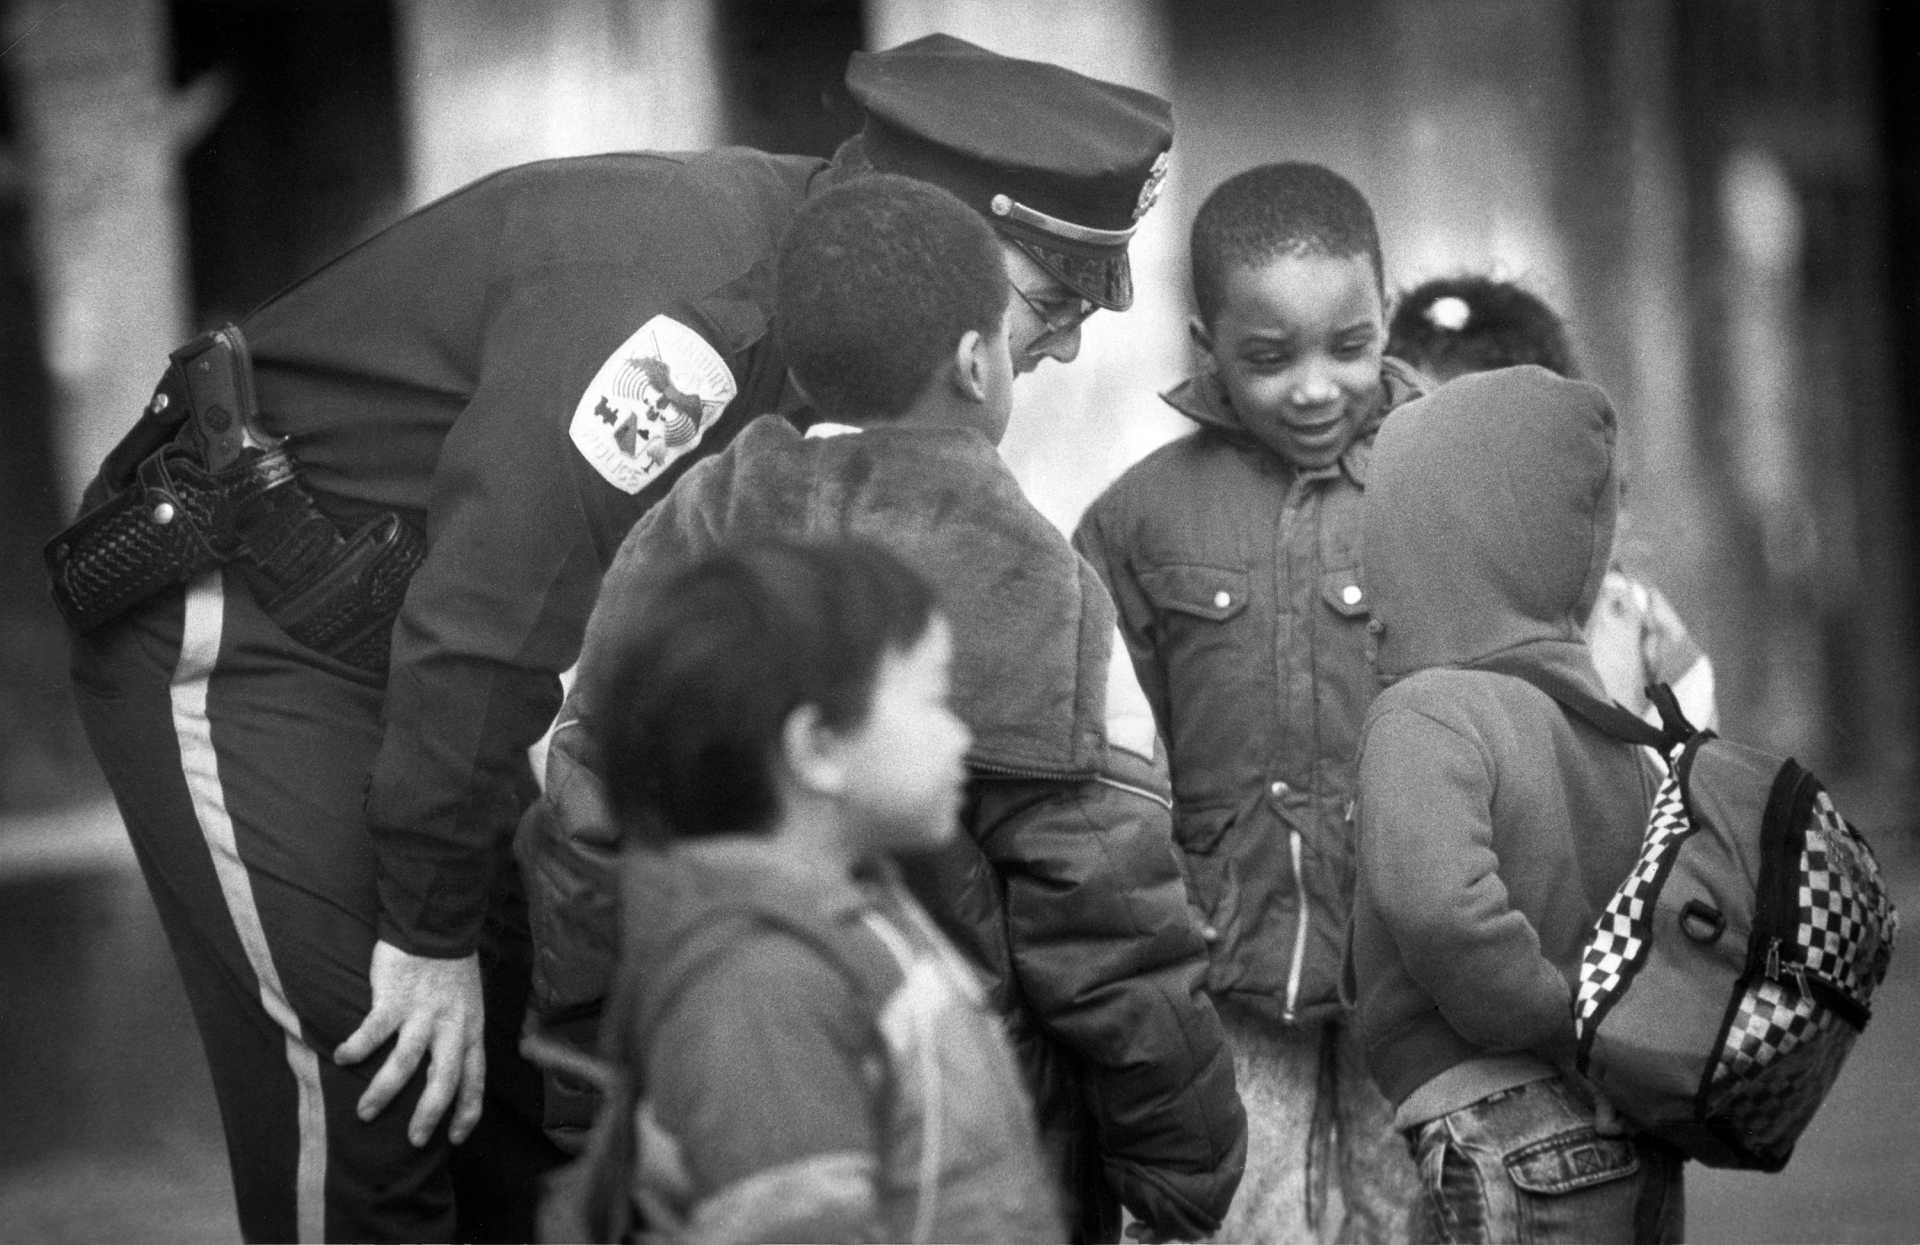 Danbury Police Officer Jim Marino stops to chat with school children waiting for the bus on Main Street. 1990.